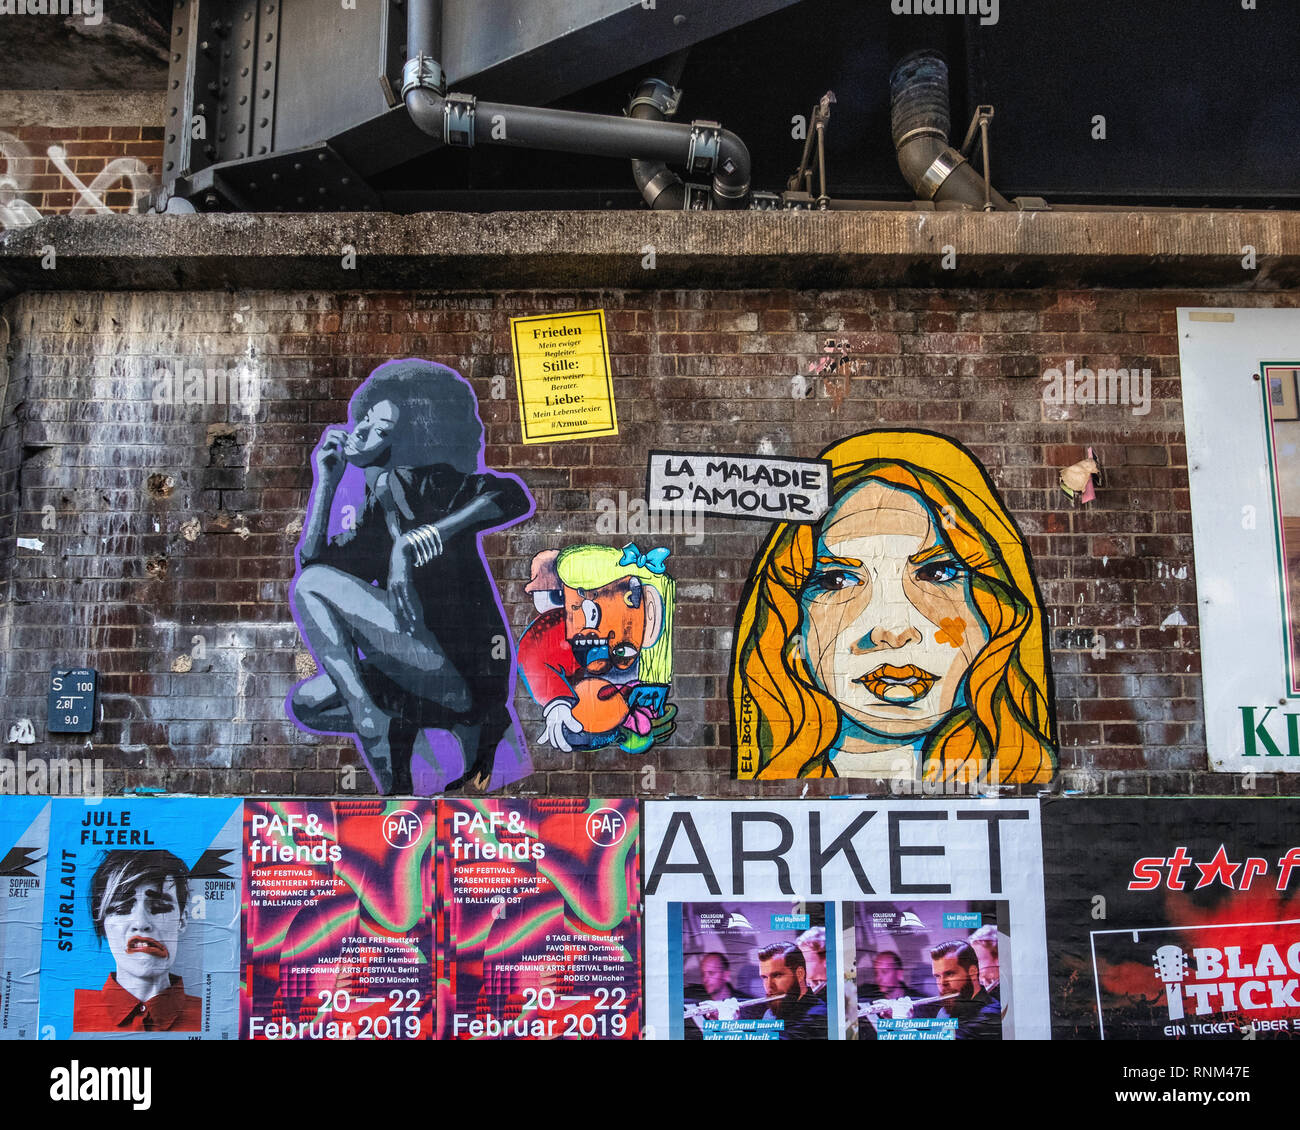 Berlin, Hackescher Markt. Railway station viaduct, old brick wall, pipes, posters and street art paste-ups Stock Photo